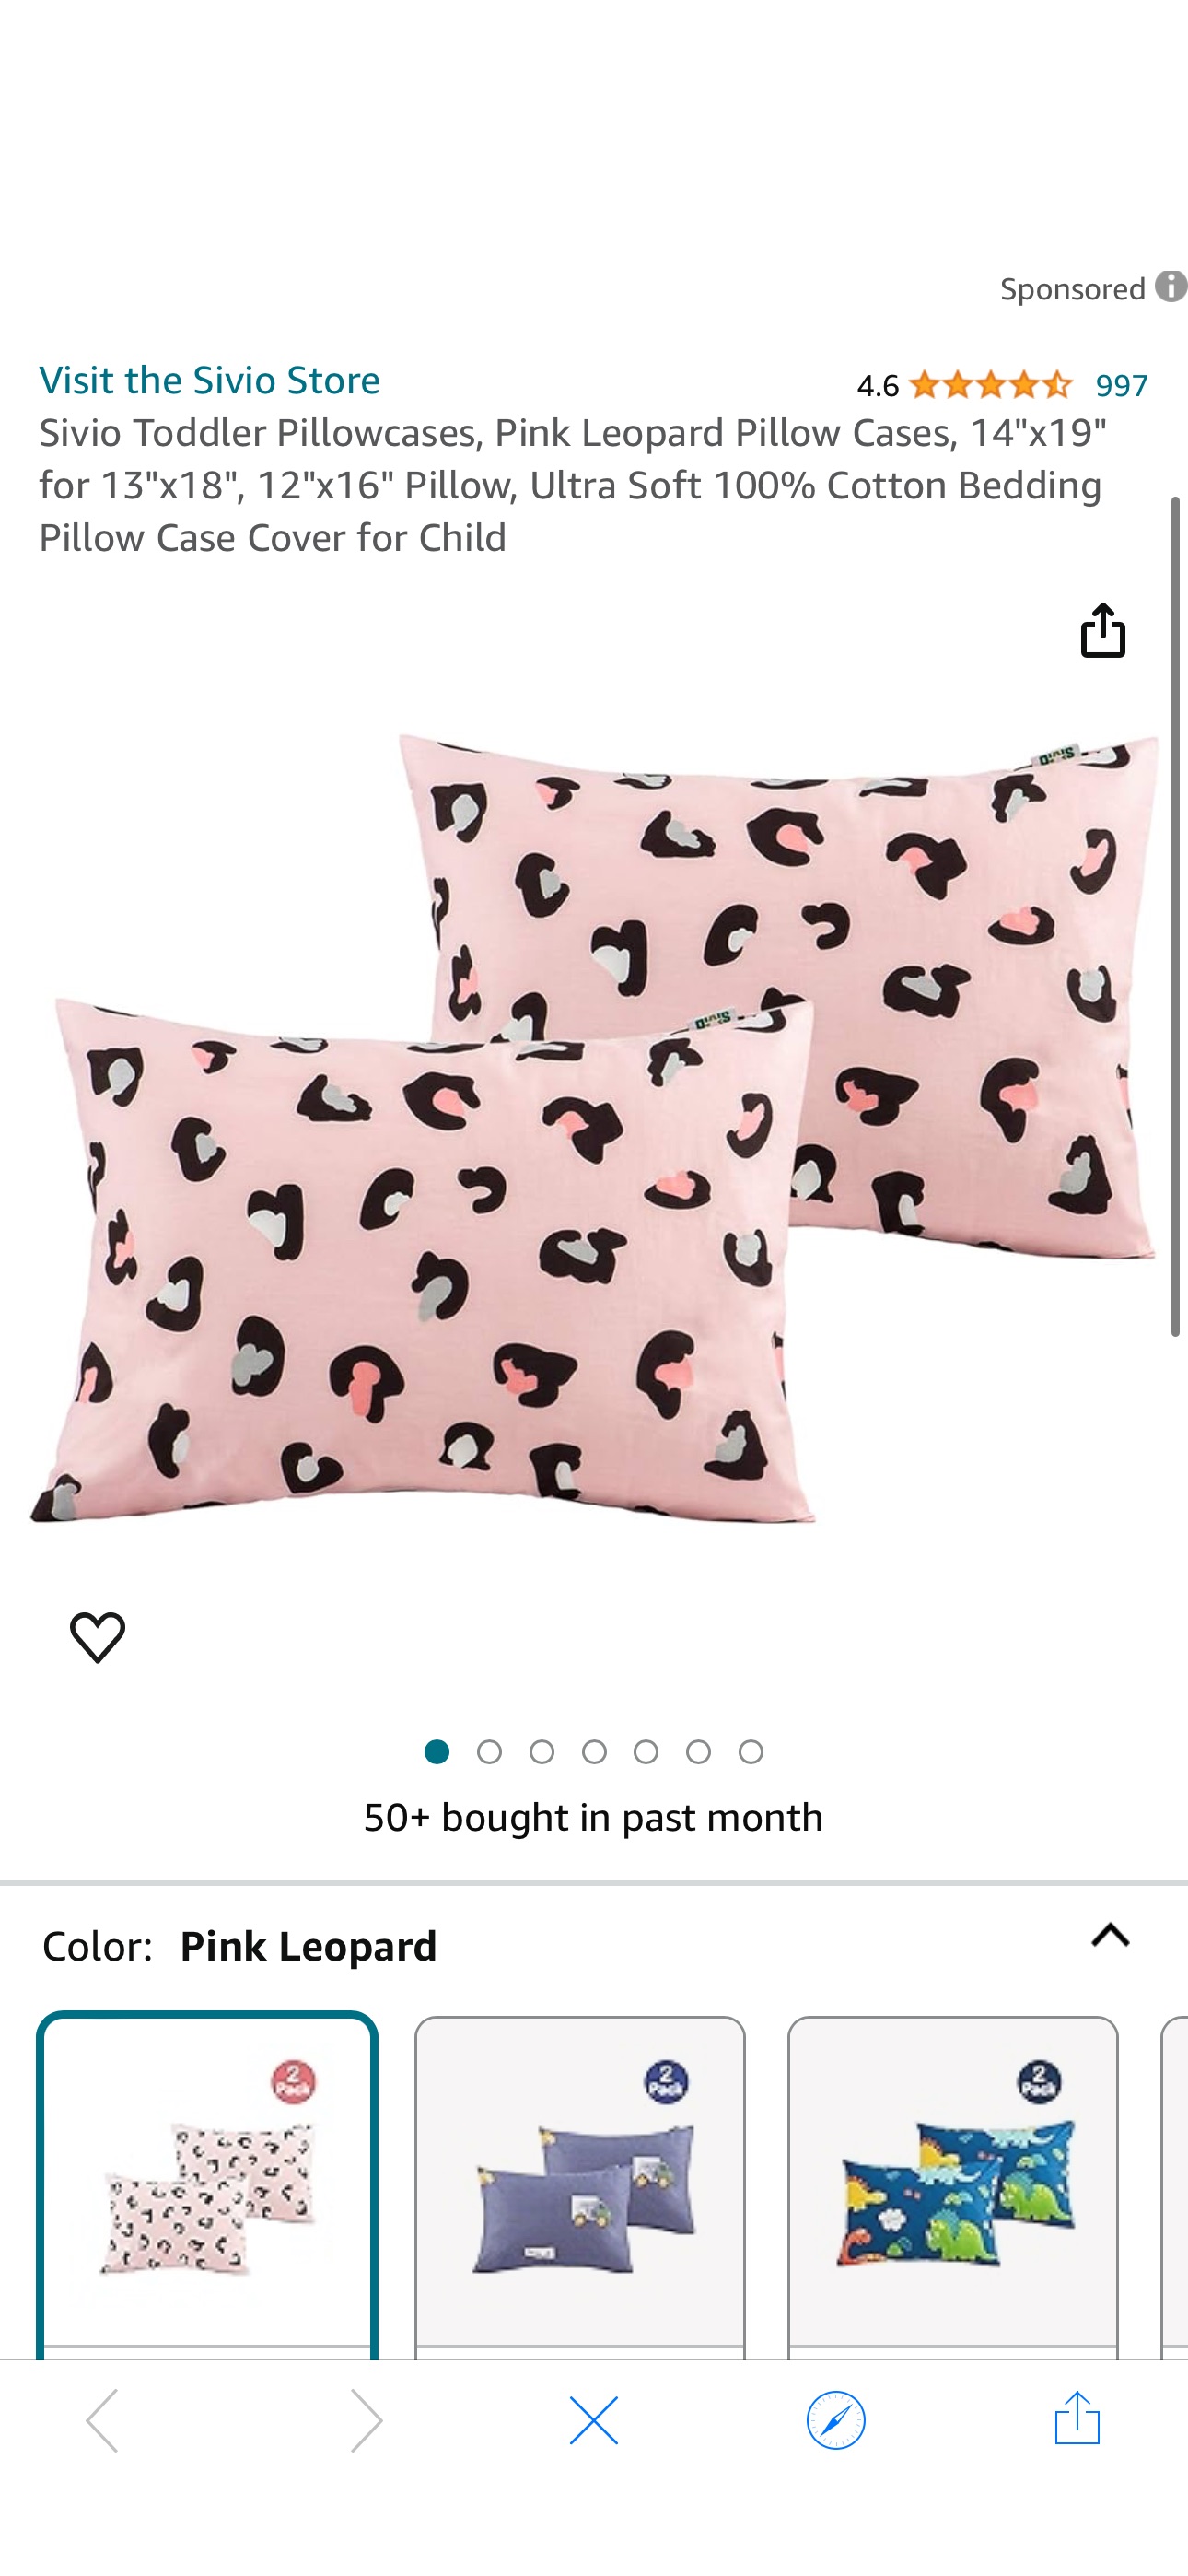 Amazon.com: Sivio Toddler Pillowcases, Pink Leopard Pillow Cases, 14"x19" for 13"x18", 12"x16" Pillow, Ultra Soft 100% Cotton Bedding Pillow Case Cover for Child : Baby